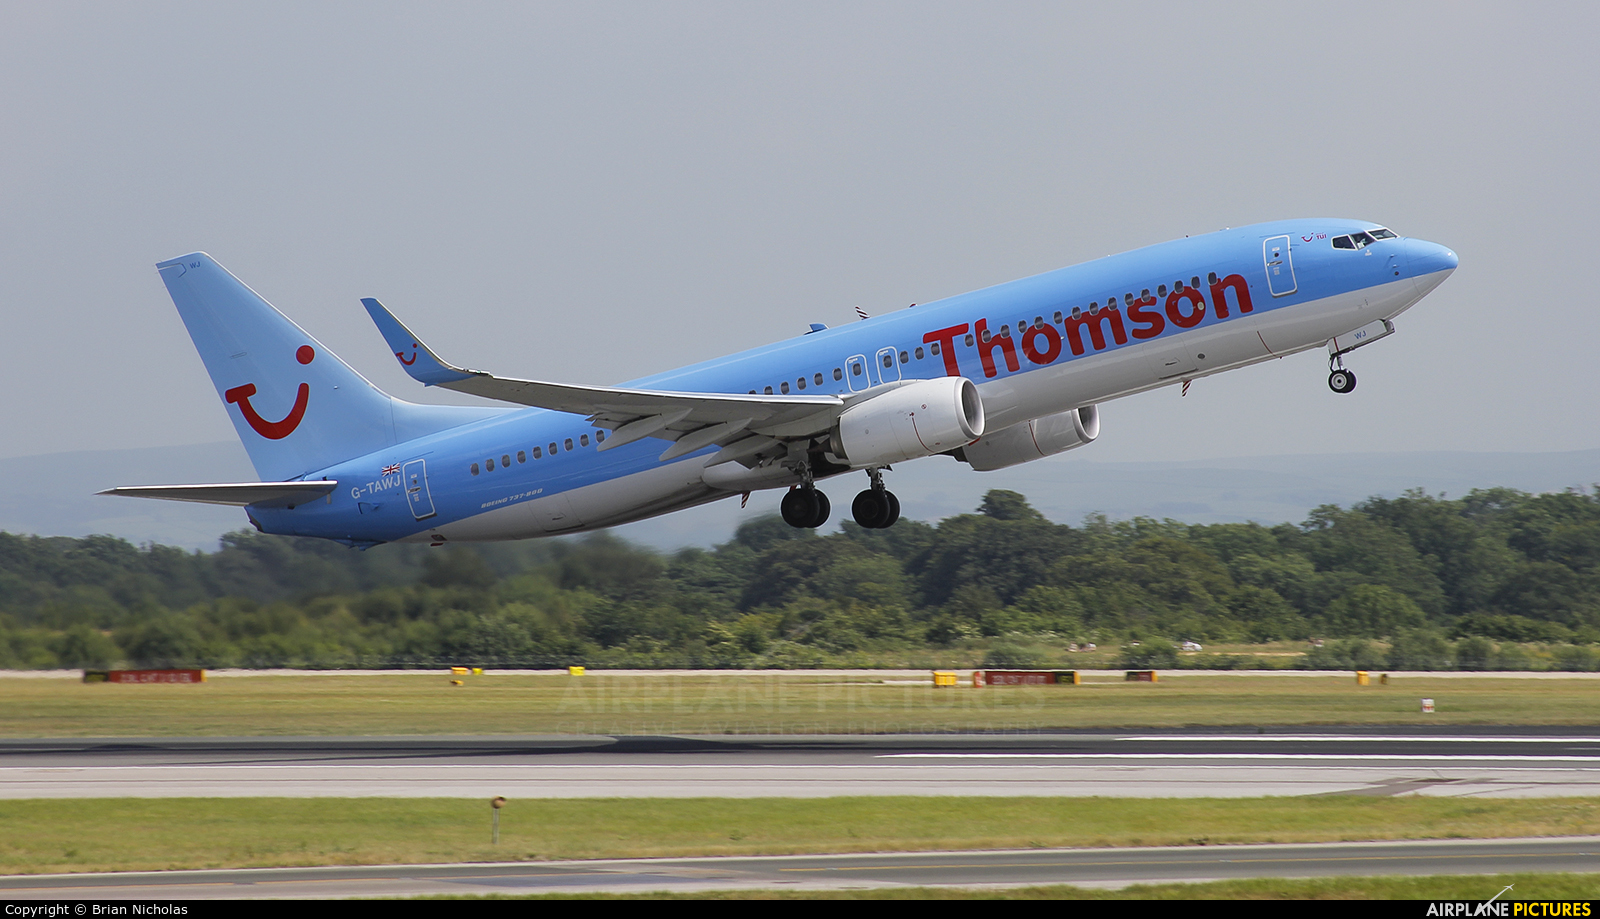 Thomson/Thomsonfly G-TAWJ aircraft at Manchester